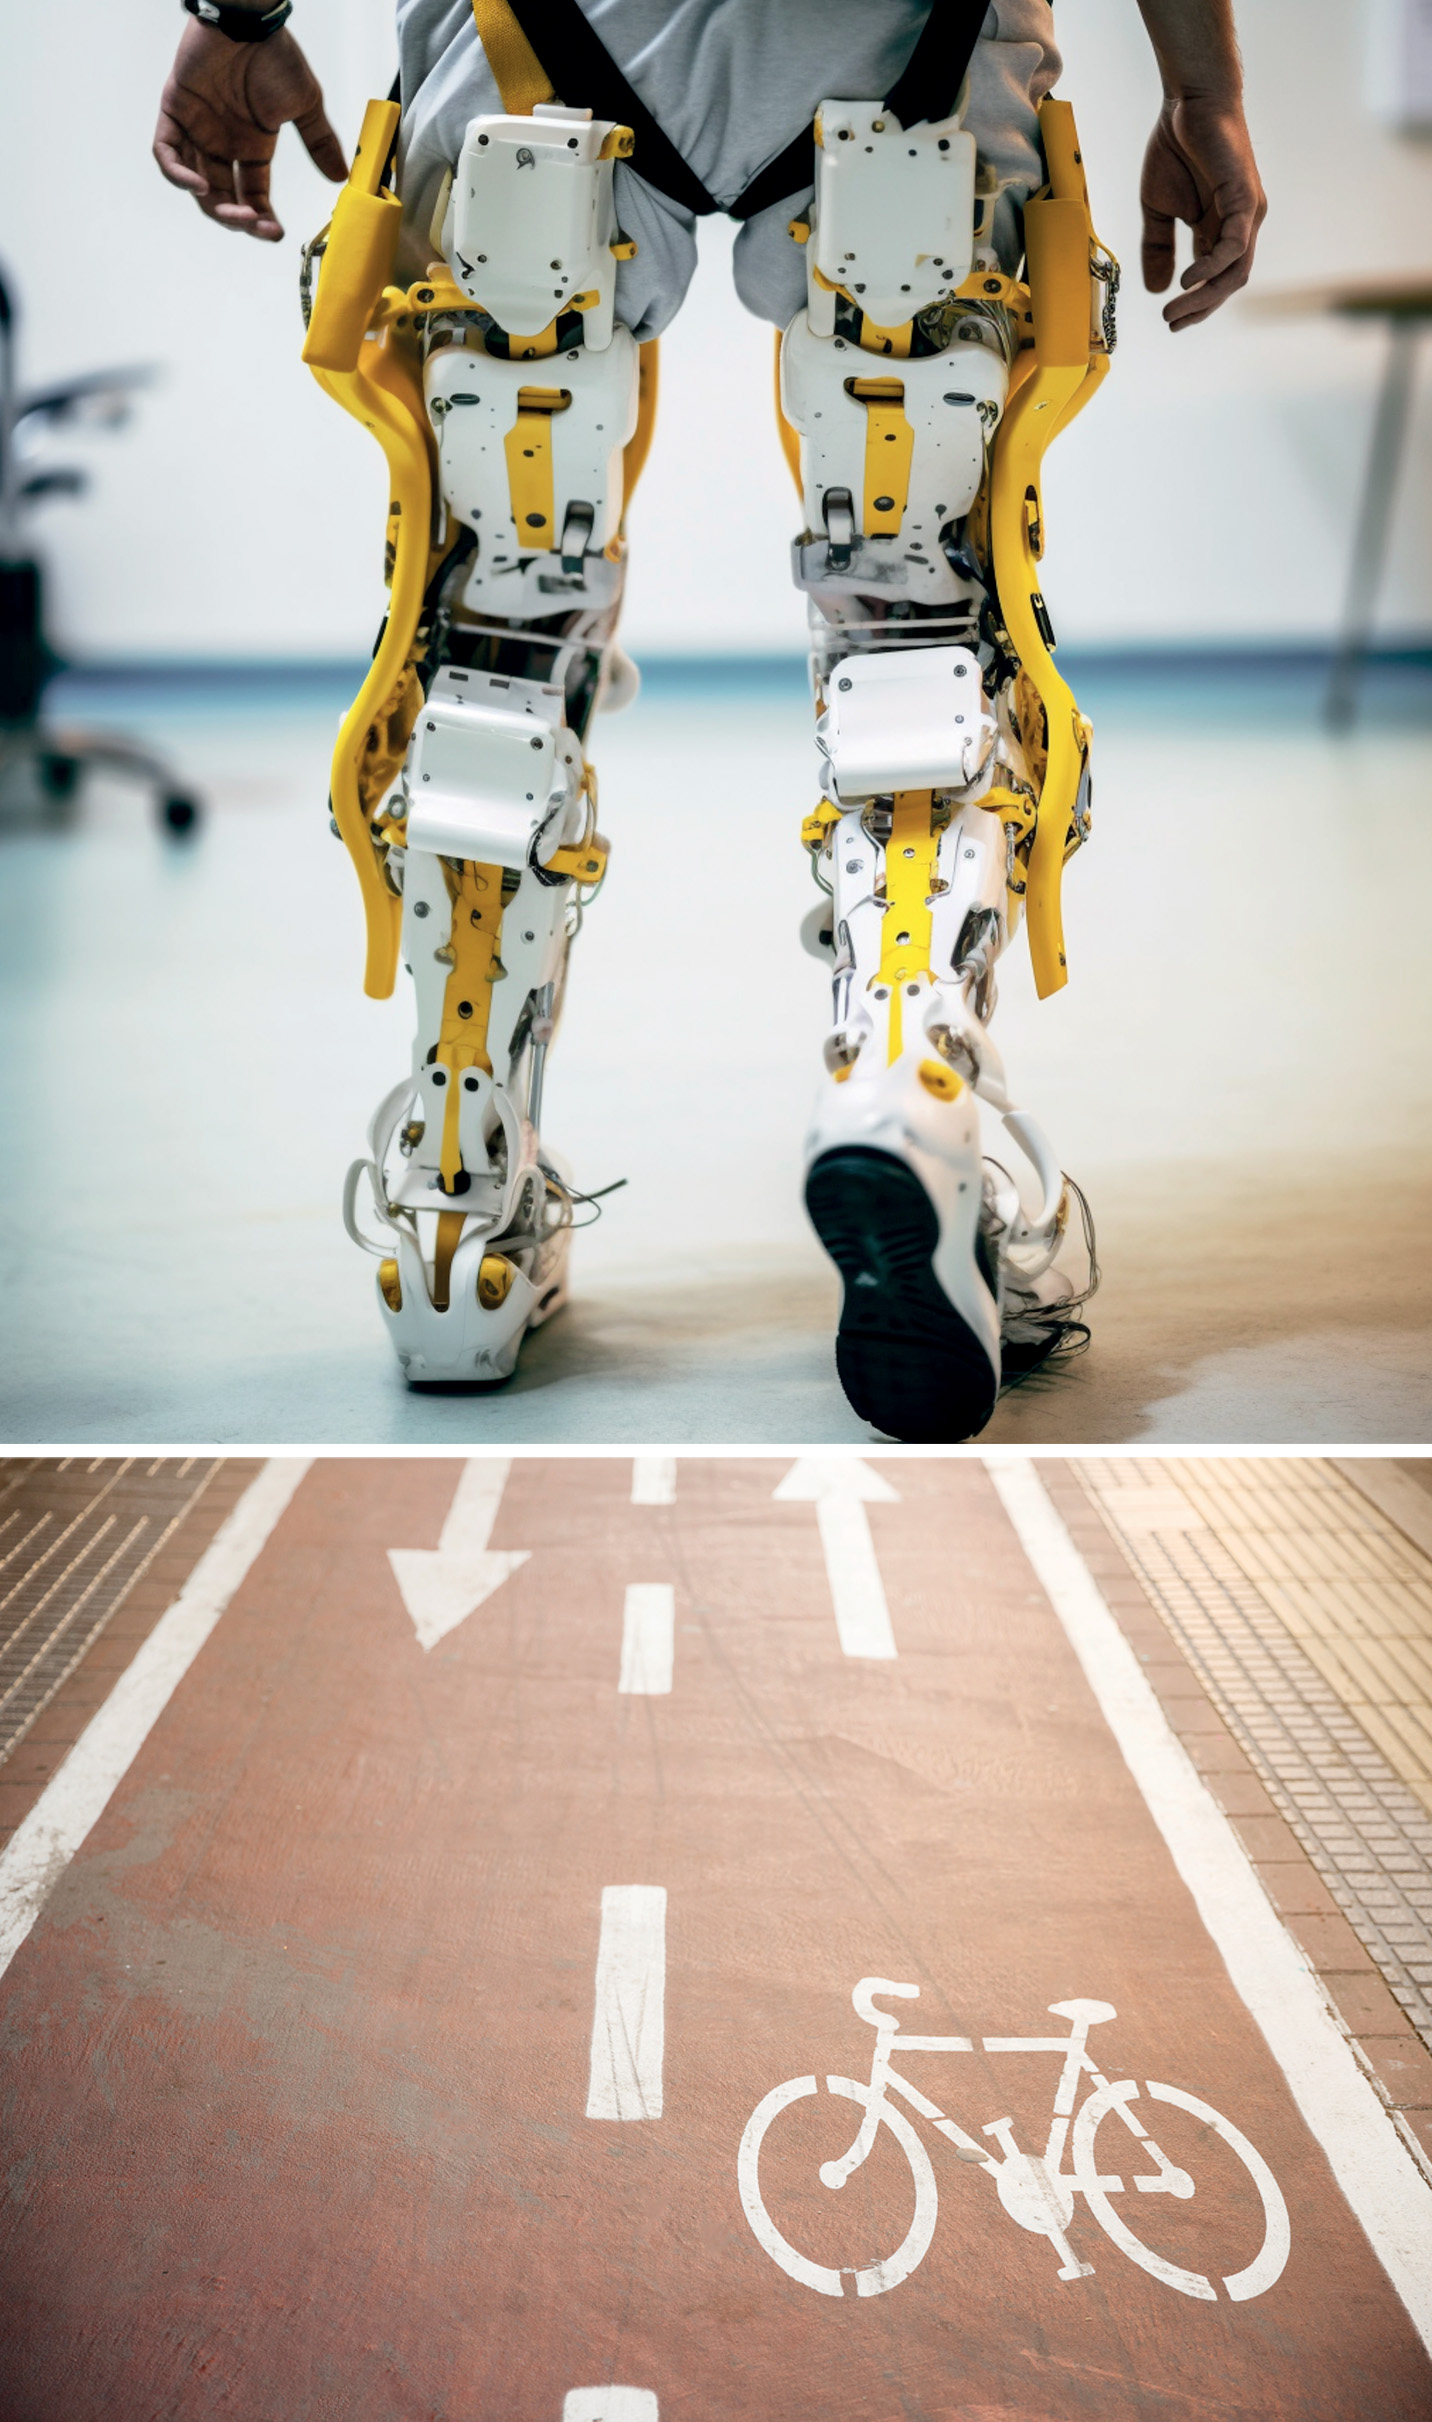 the-advanced-technologies-slow-mobility-exoskeletons-are-wearable-machines-that-augment-human -capabilities-electric-battery-enabled-wheelchair-designated-bike-lane